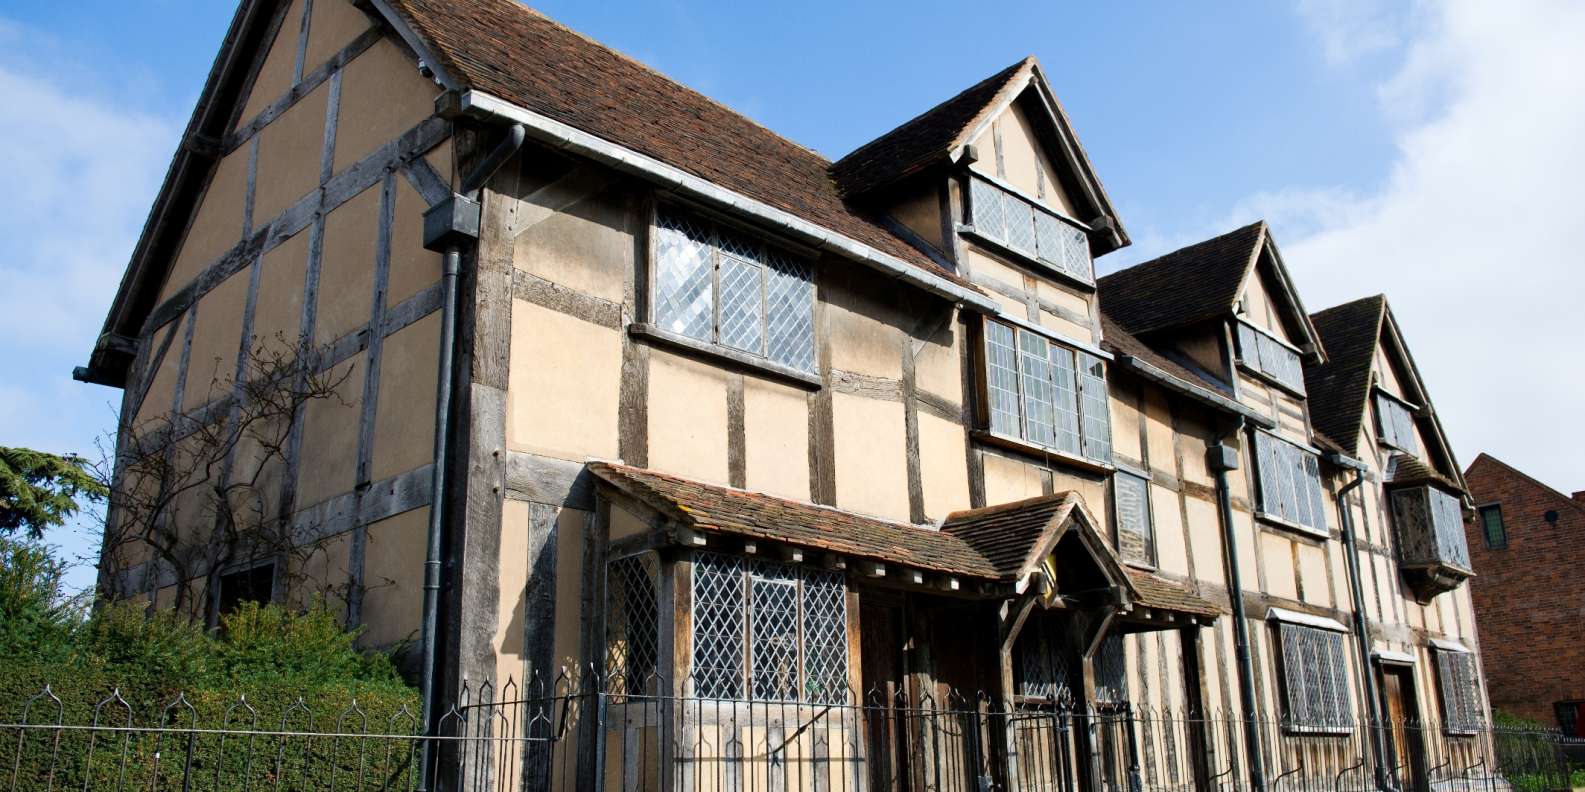 What to do in Stratford-upon-Avon